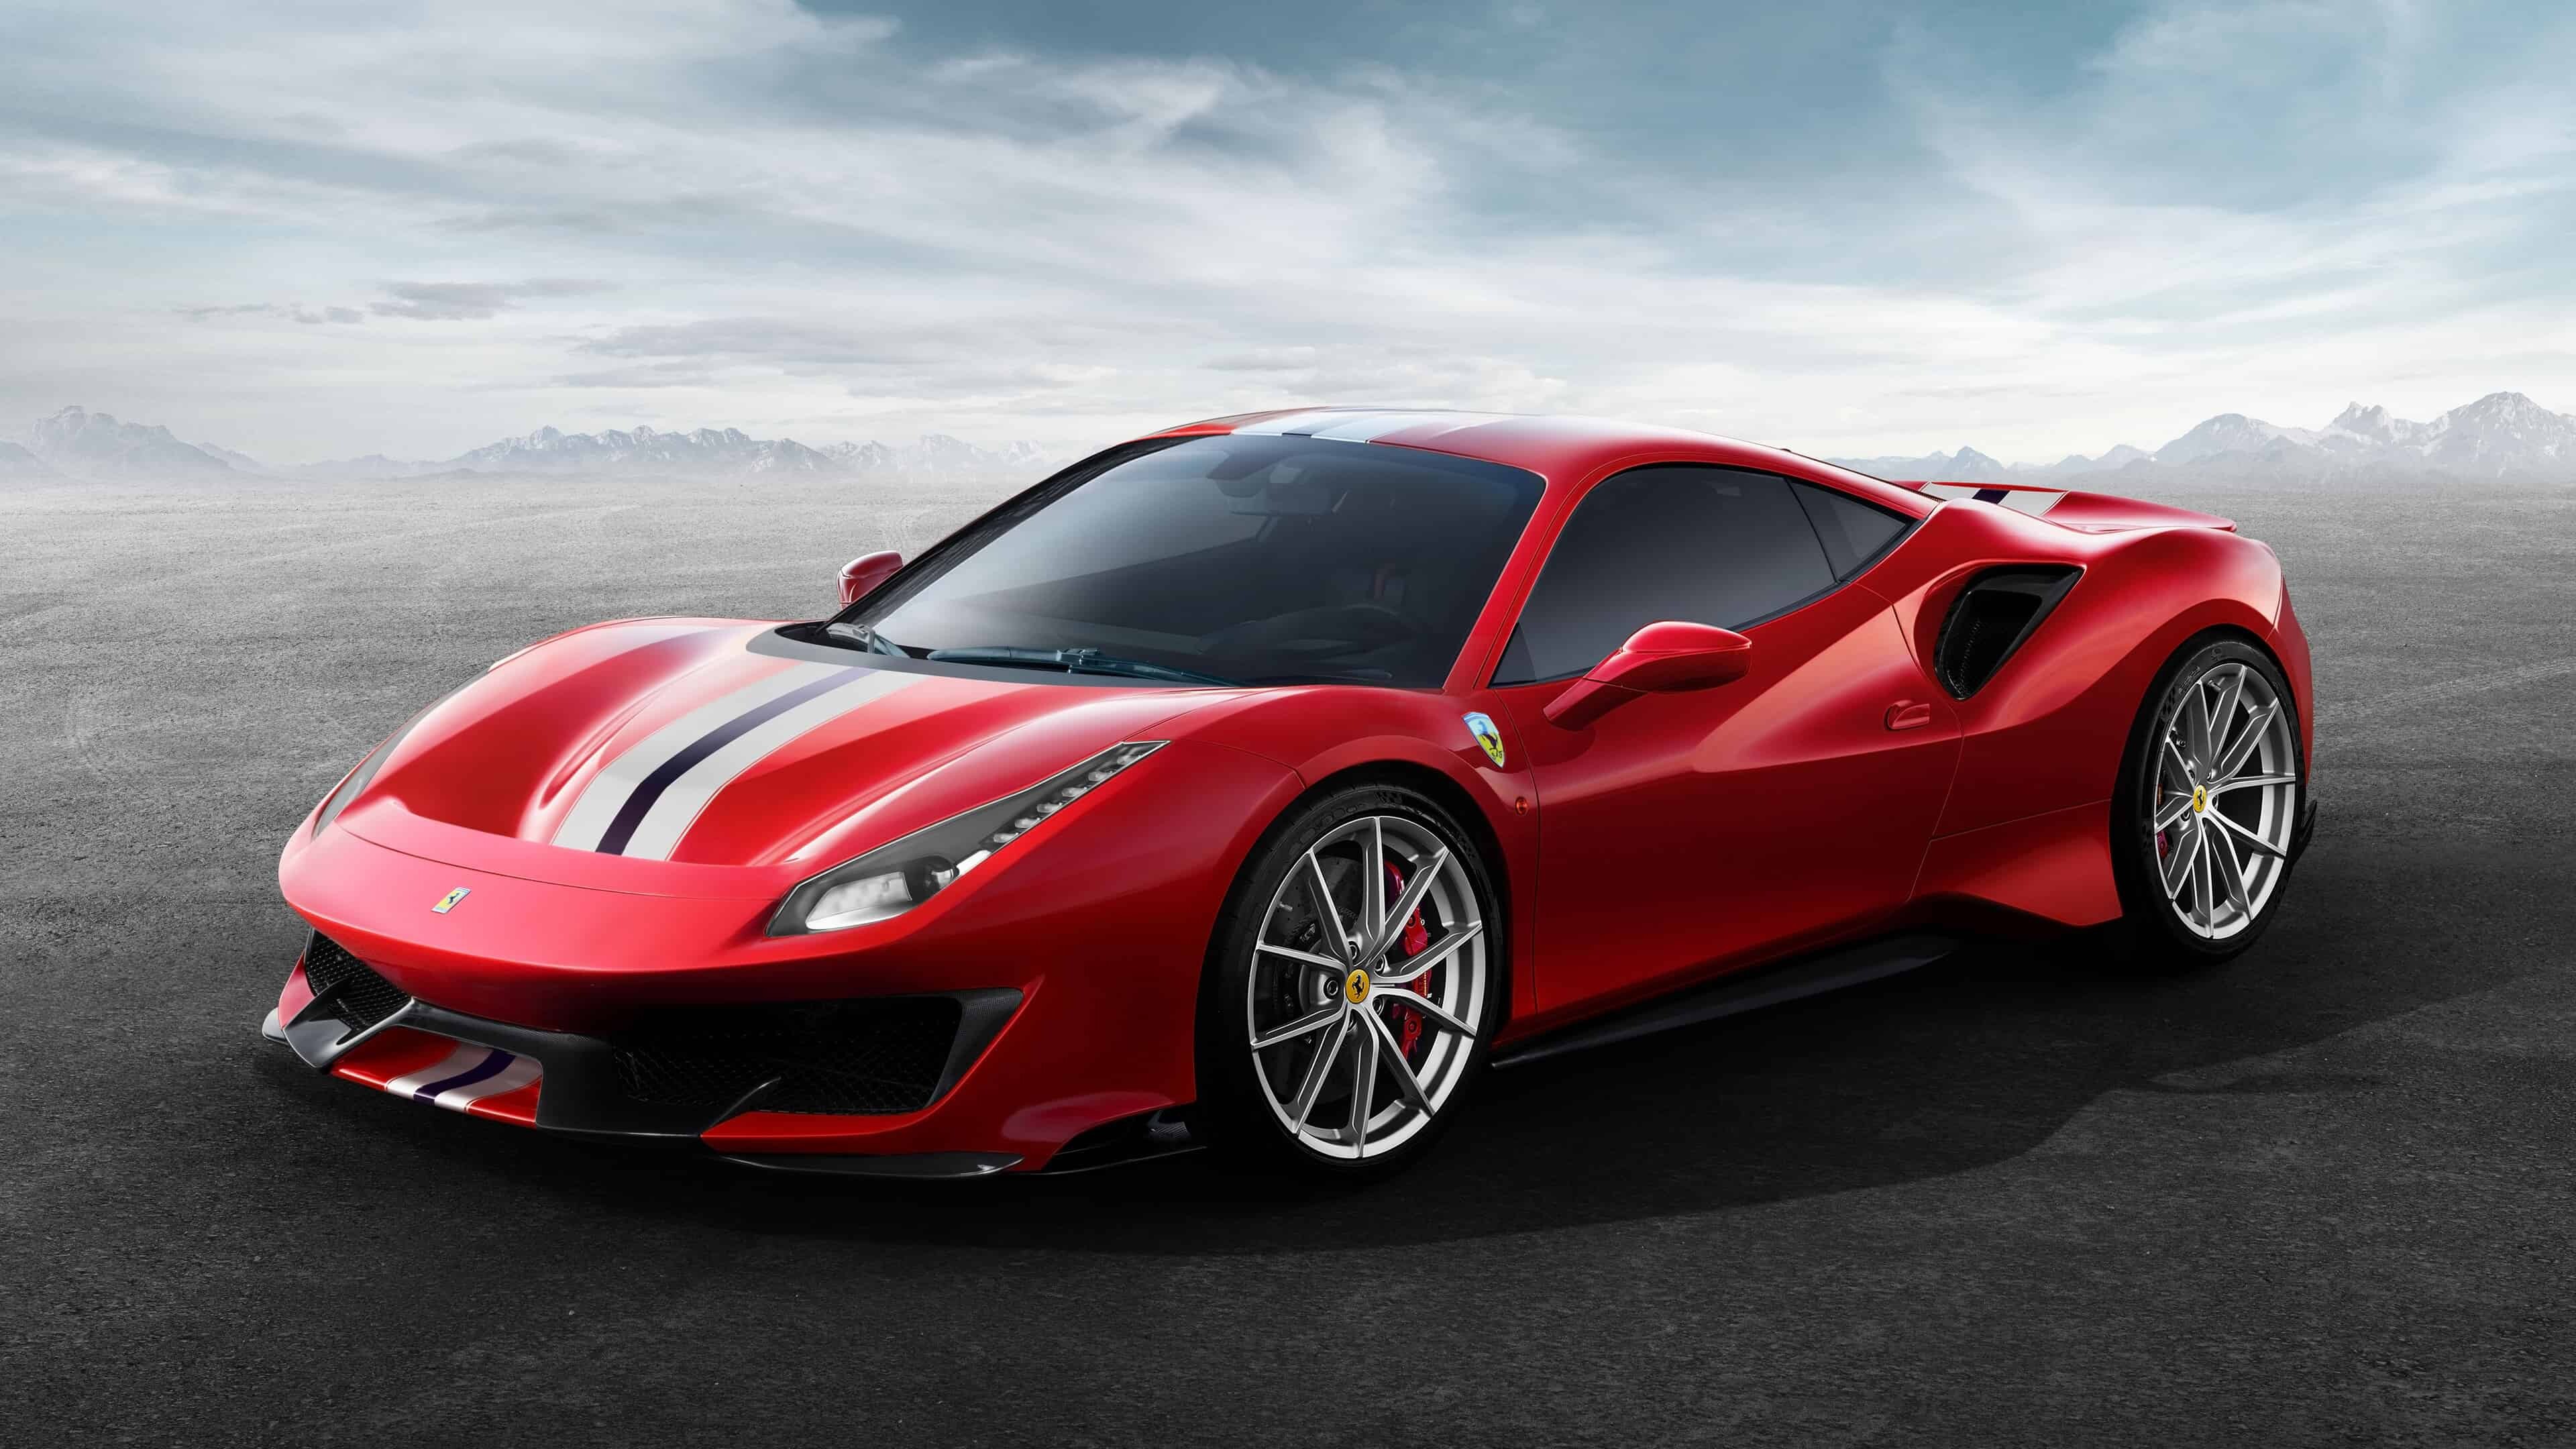 Ferrari: The 488 Pista is powered by the most powerful V8 engine in the Maranello marque's history and is the company's special series sports car. 3840x2160 4K Wallpaper.